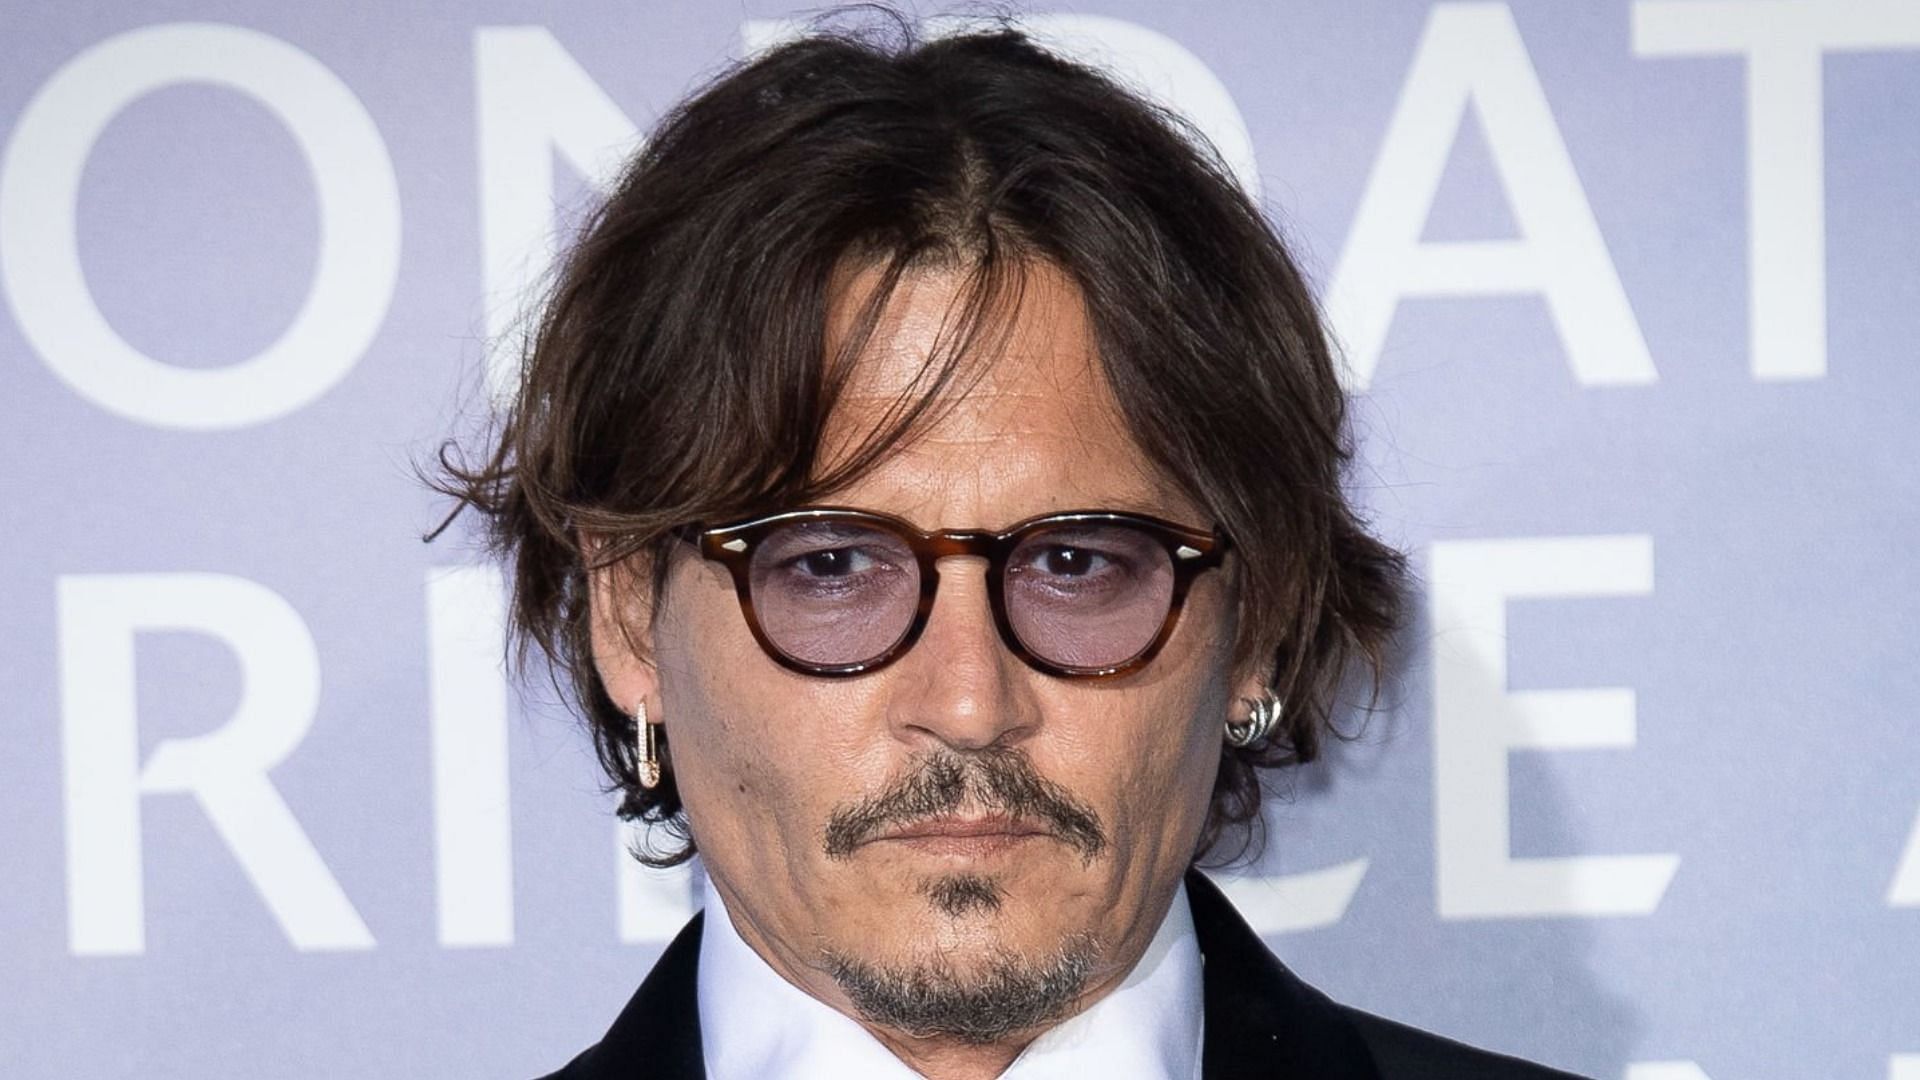 Johnny Depp&#039;s sister Christi Dembrowski revealed that they were abused by their mother during childhood (Image via Getty Images)